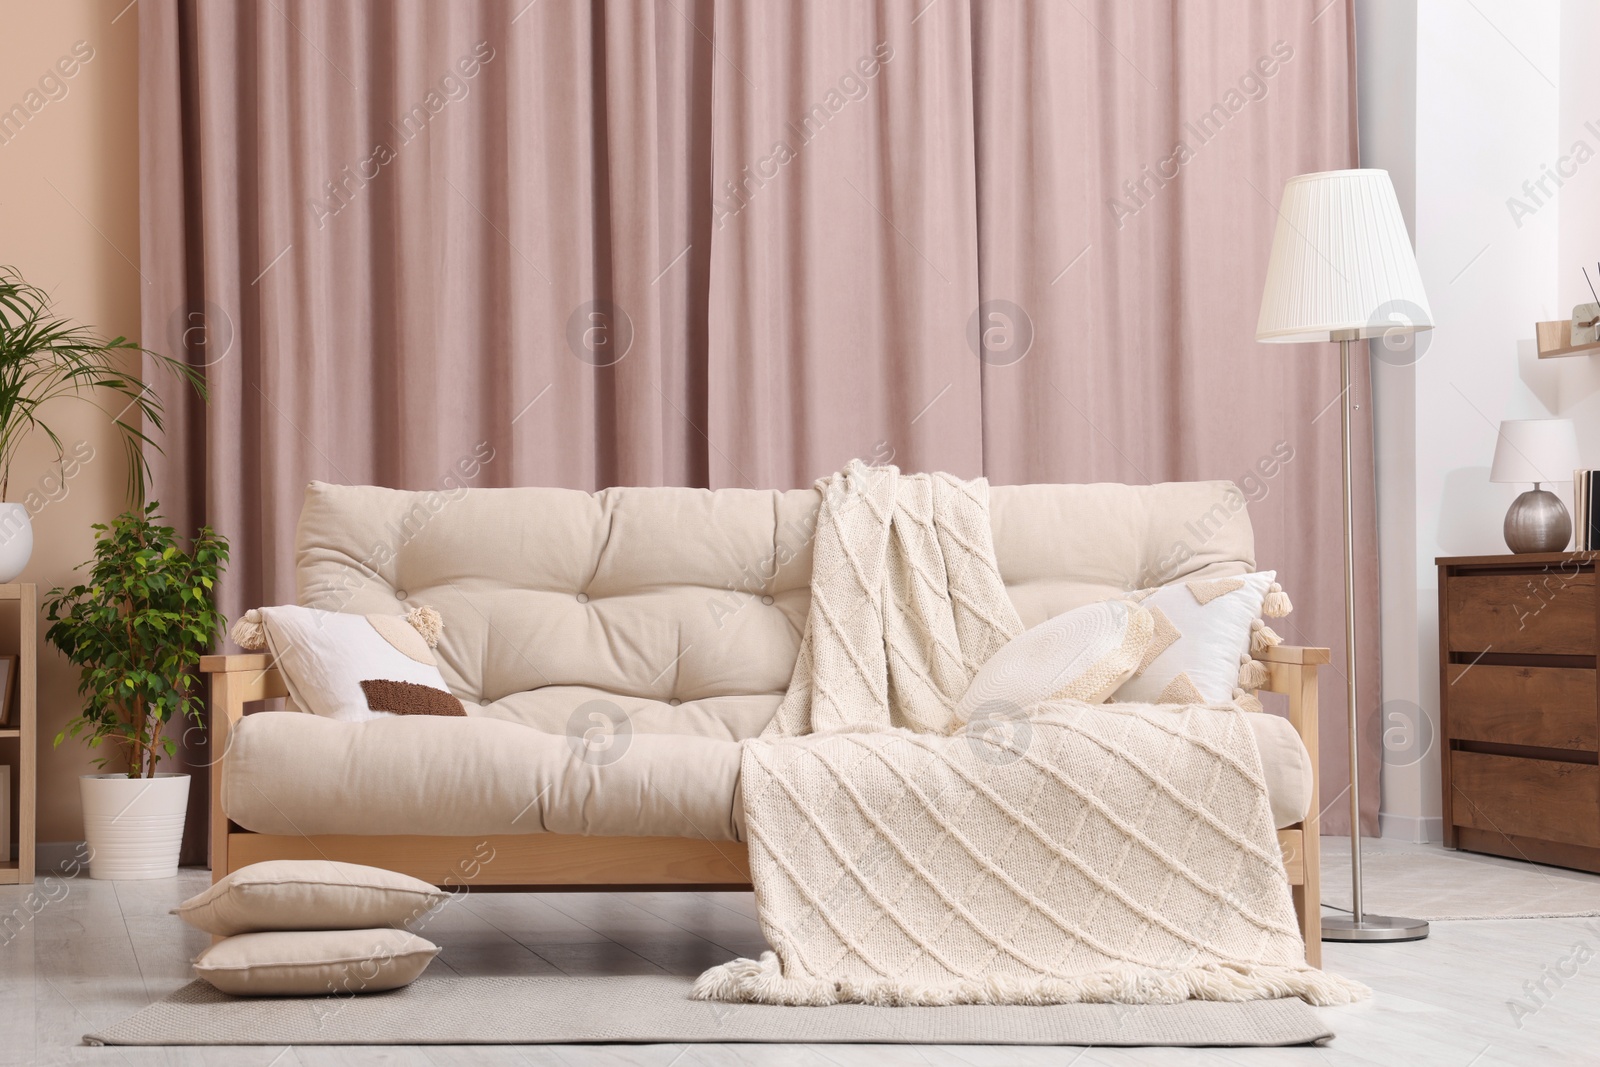 Photo of Comfortable sofa, cushions and blanket in cozy room. Interior design